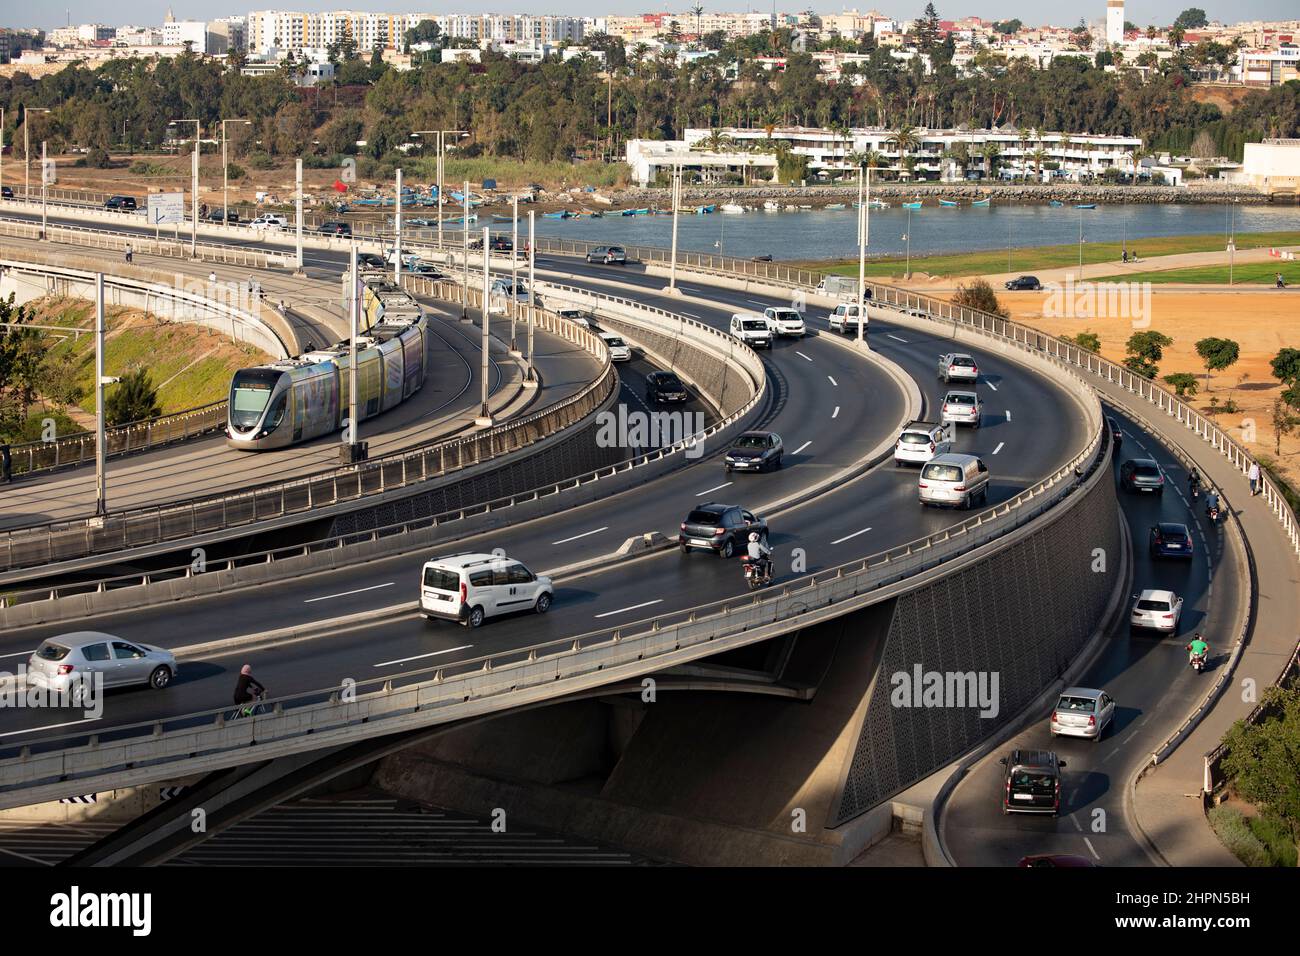 Busy vehicle traffic and passenger train moves across the Hassan II bridge connecting Salé and Rabat in Morocco, North Africa. Stock Photo